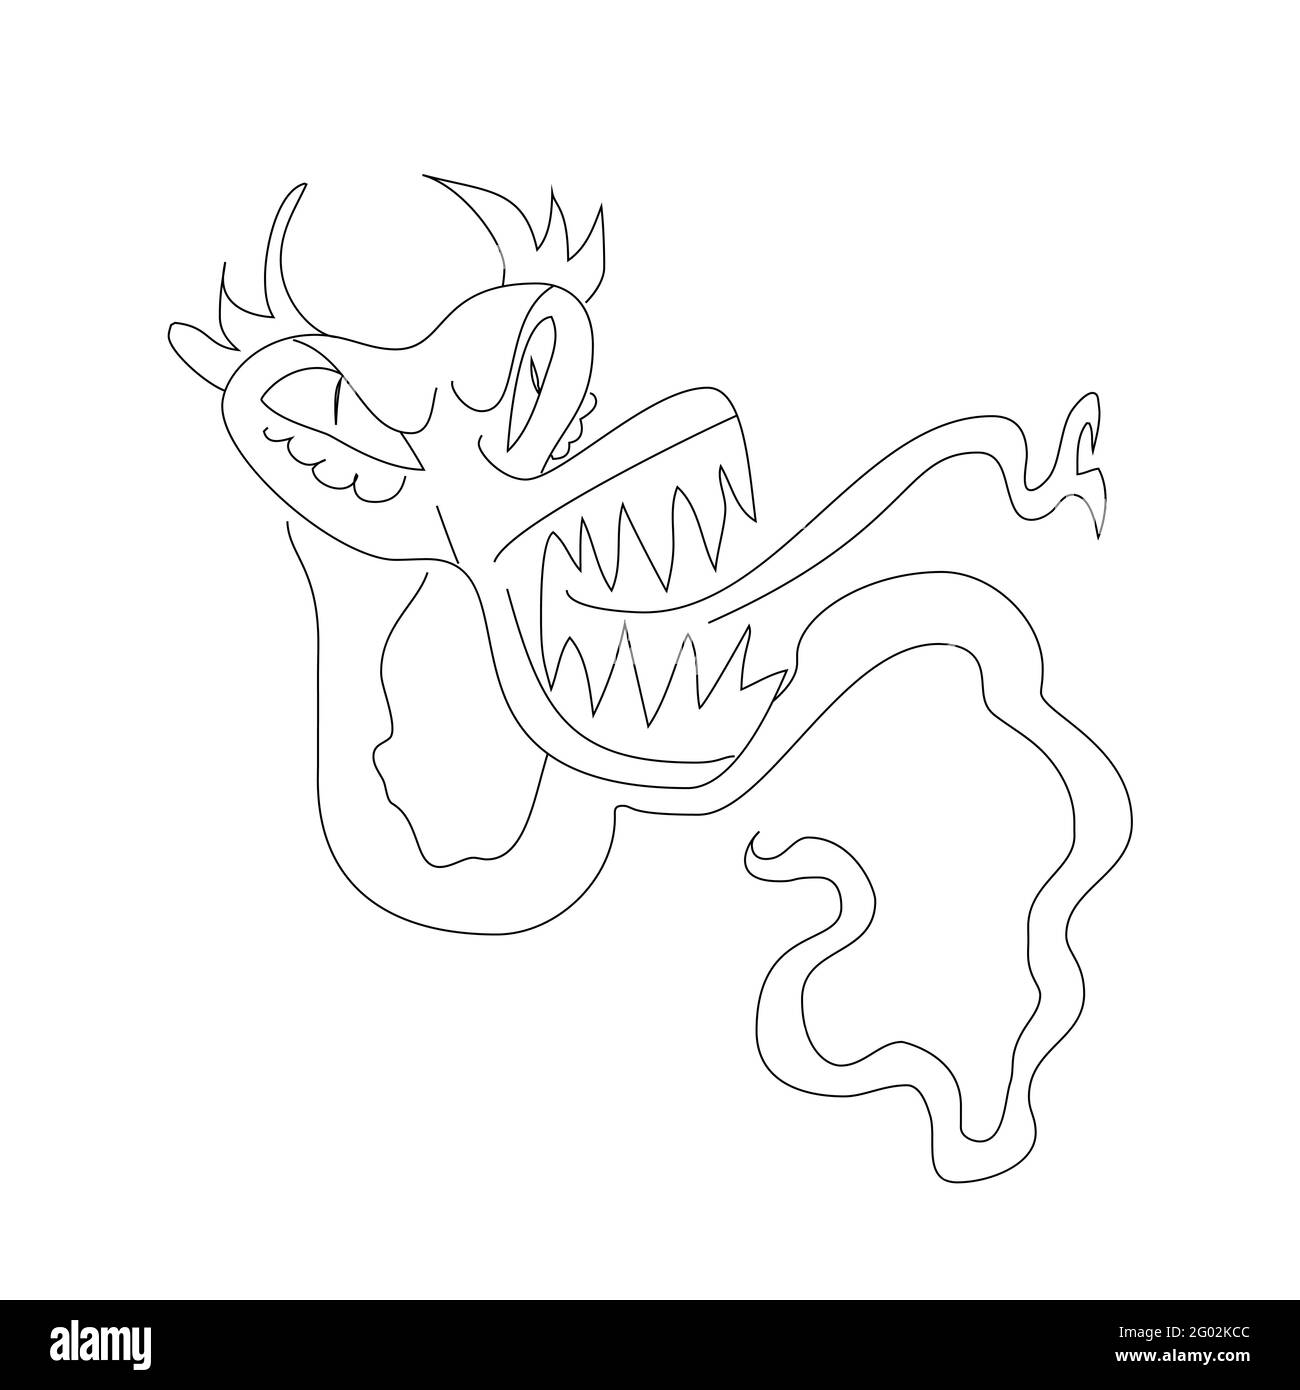 Scary worm monster, black and white sketch. Funny evil serpent or dragon. Dangerous parasite fantastic animal. Stock Vector